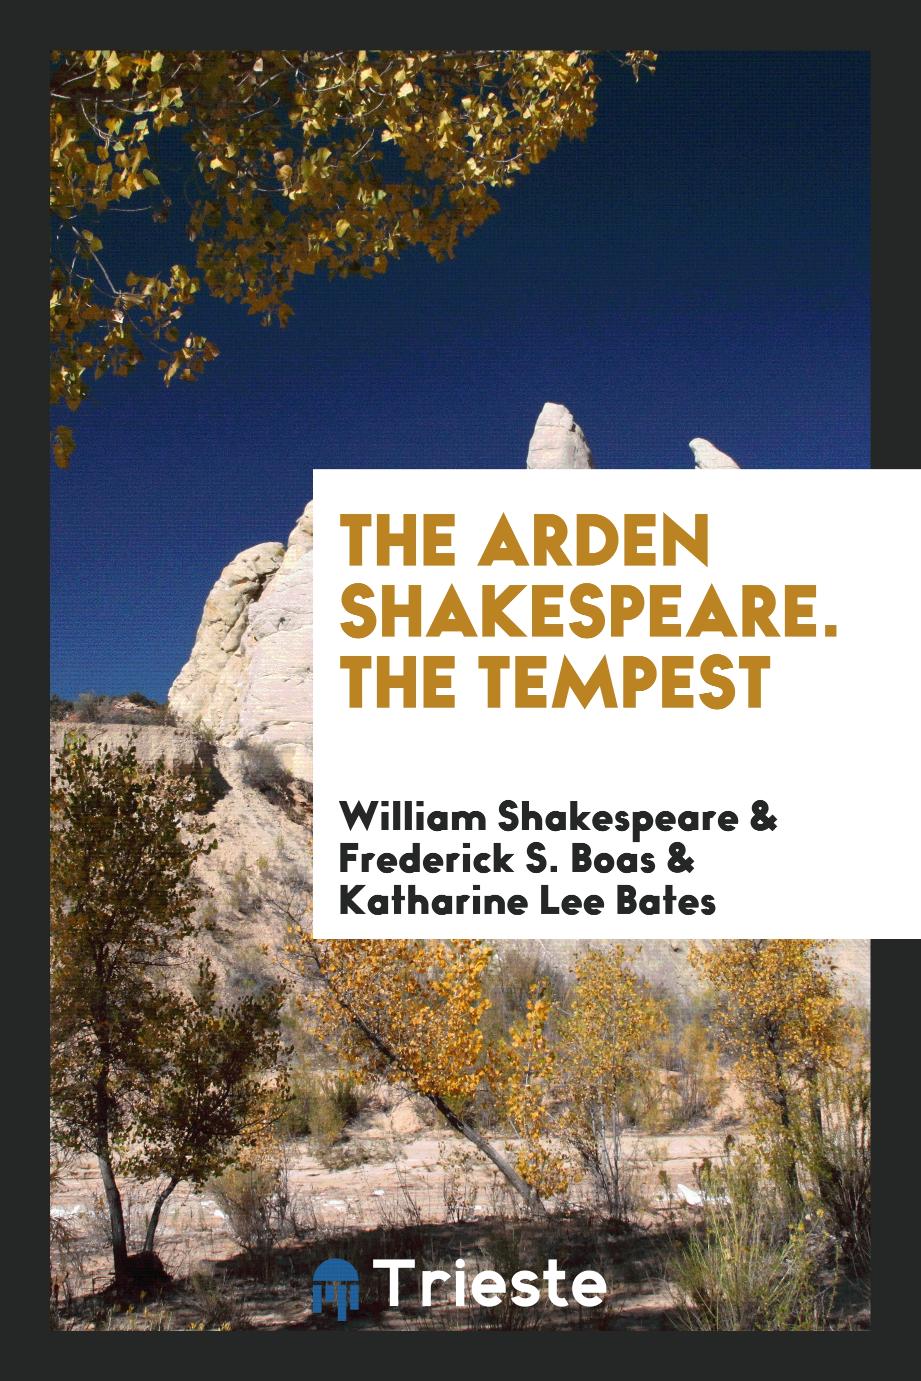 The Arden Shakespeare. The Tempest